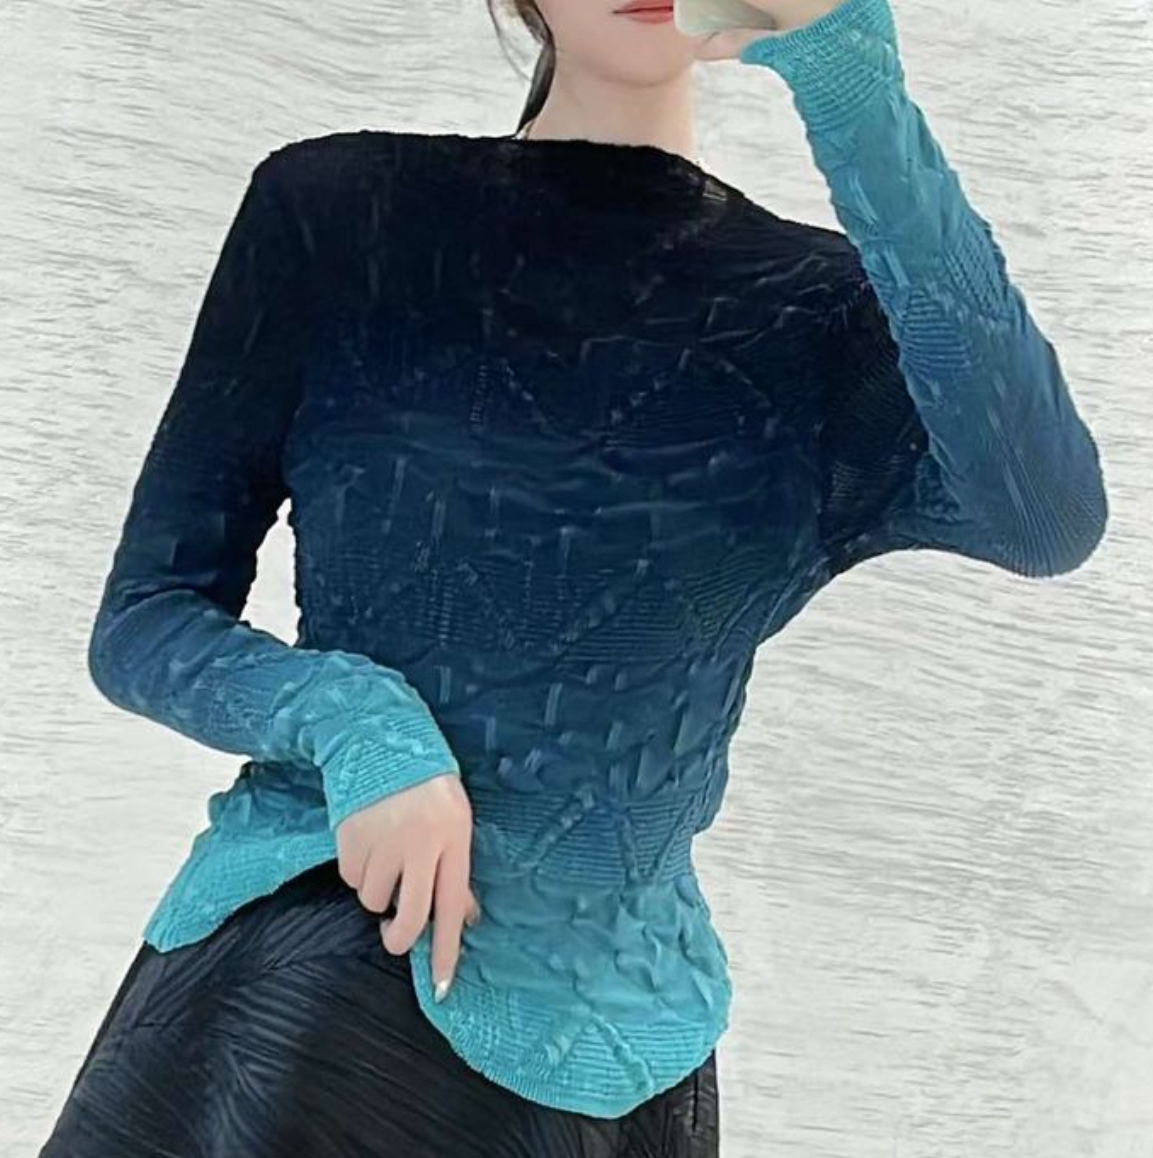 Vanité Couture 26008BT Black & Teal Ombre One Size Long Sleeve Top